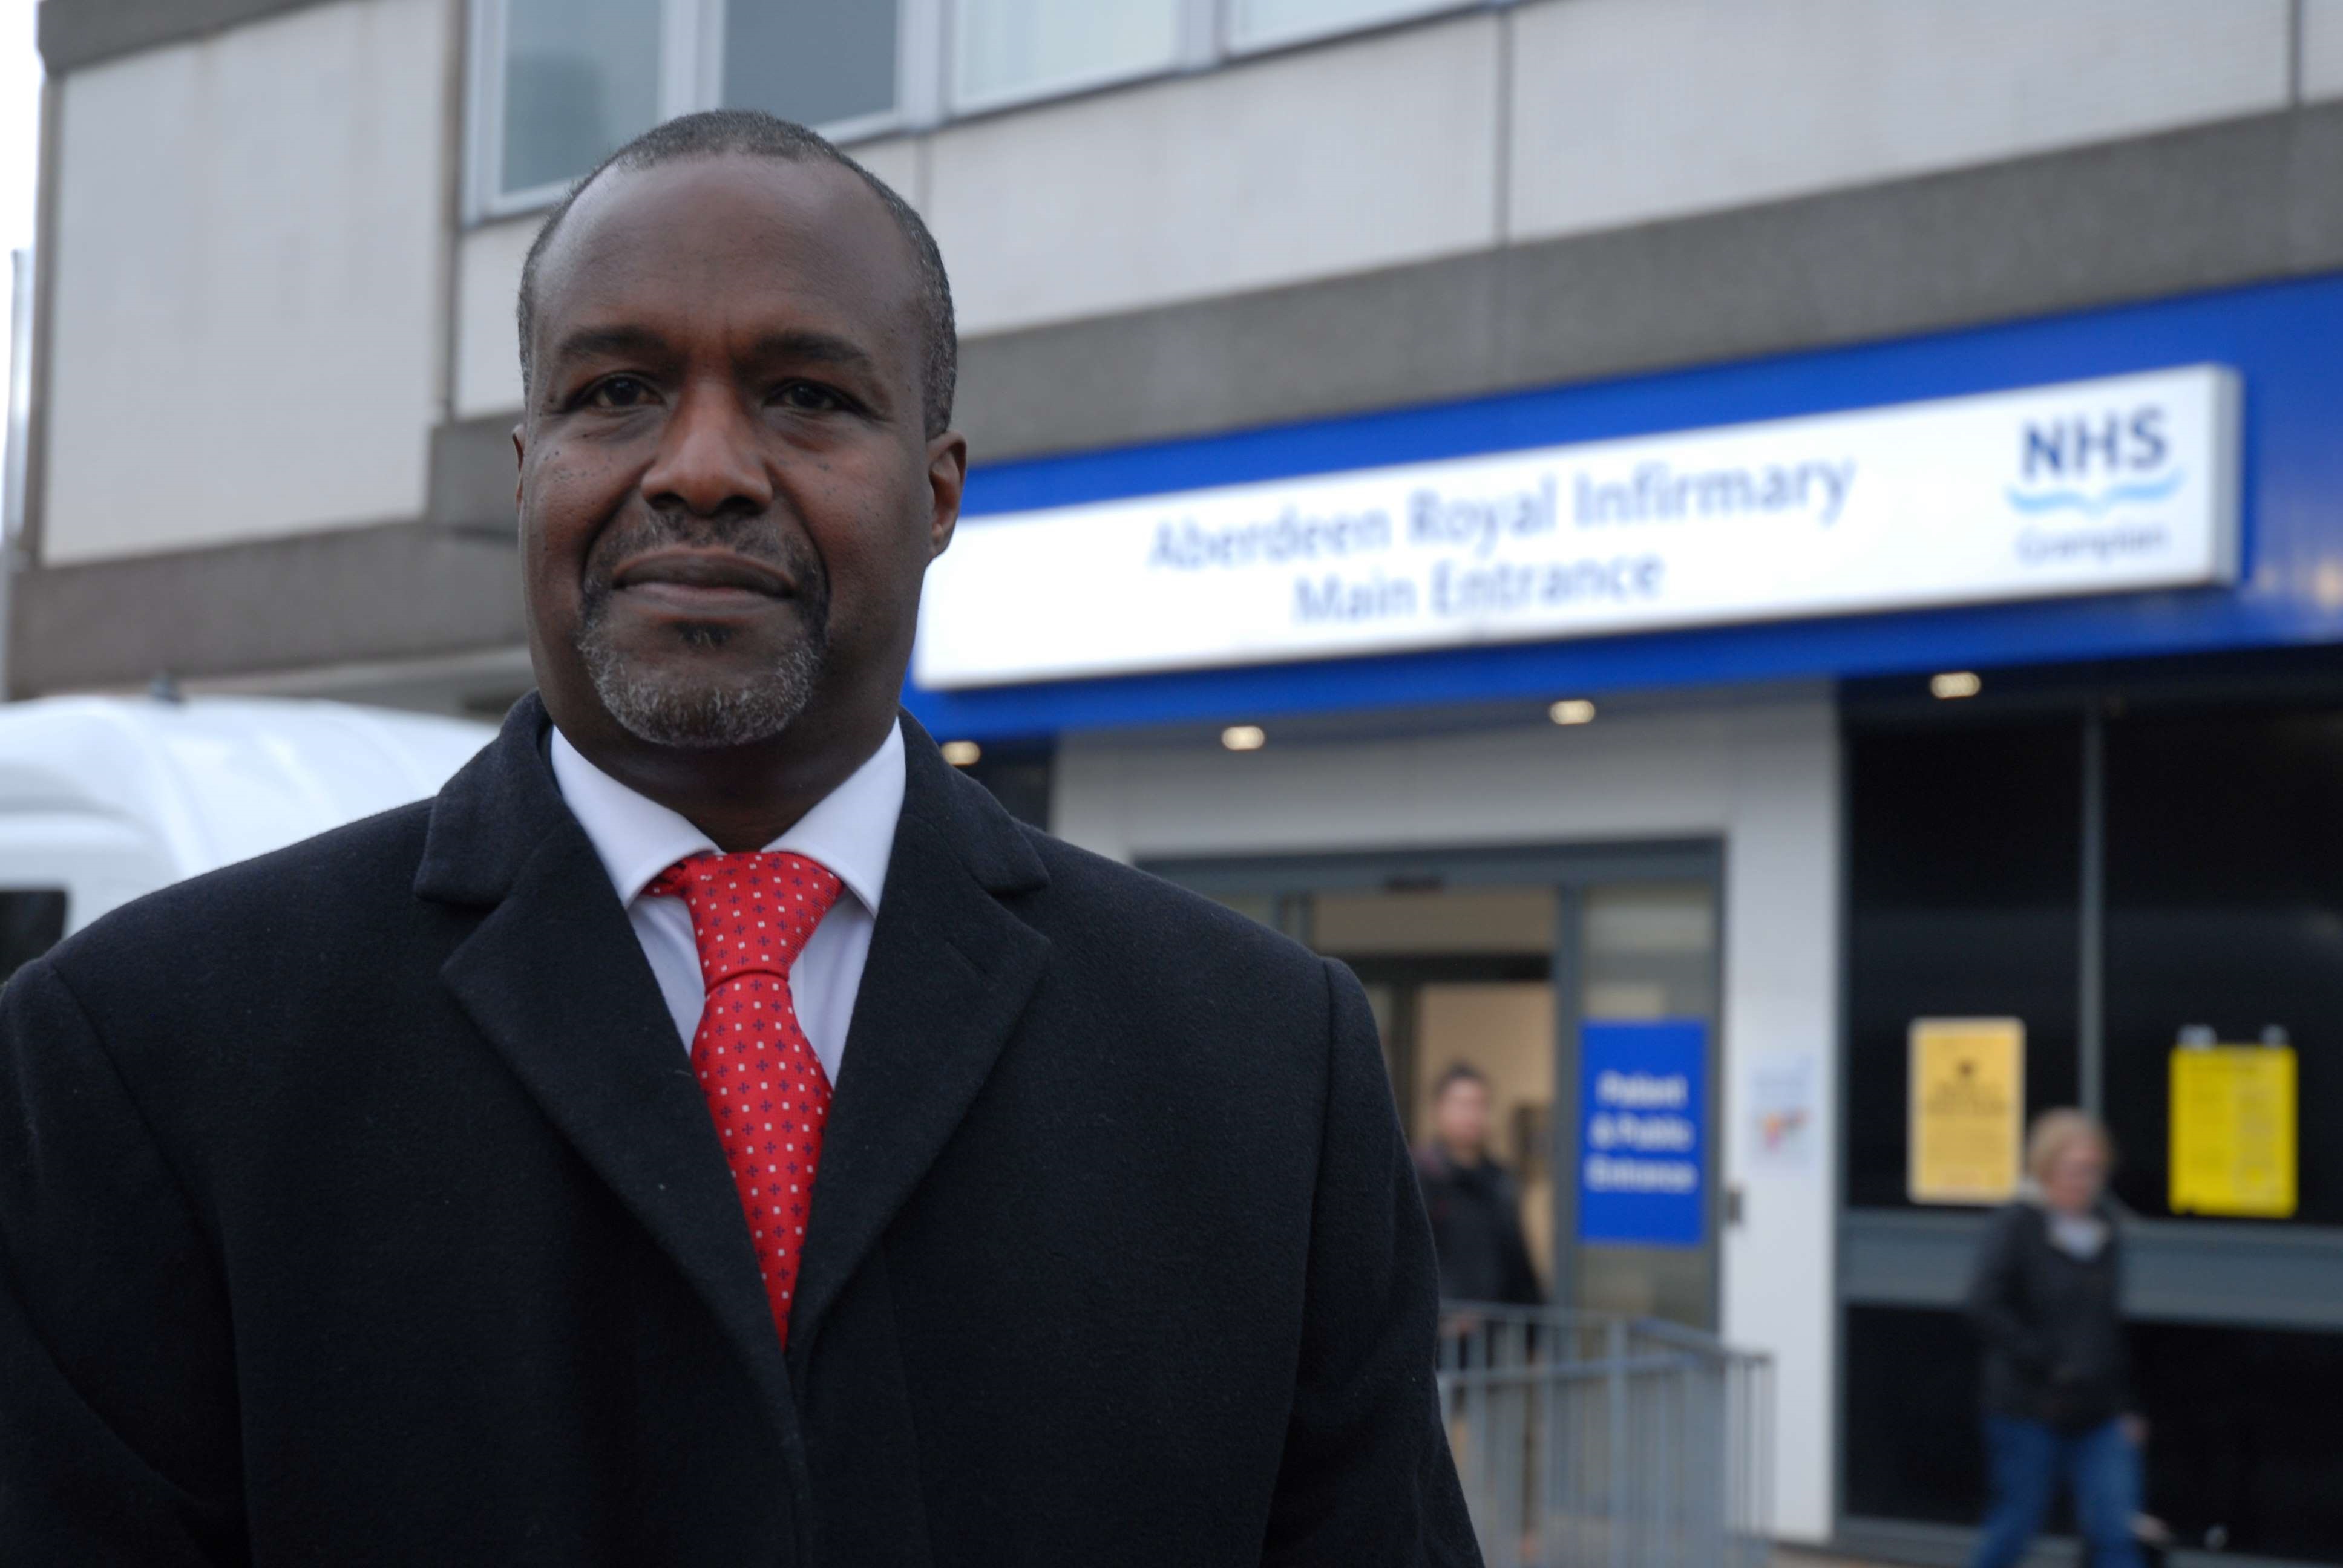 Professor James N’Dow, Professor of Urological Surgery, Chair in Urological Surgery, Director of the Academic Urology Unit and co-founder of UCAN the urological cancer charity, has become an OBE for his services to advancement of the profession of urology